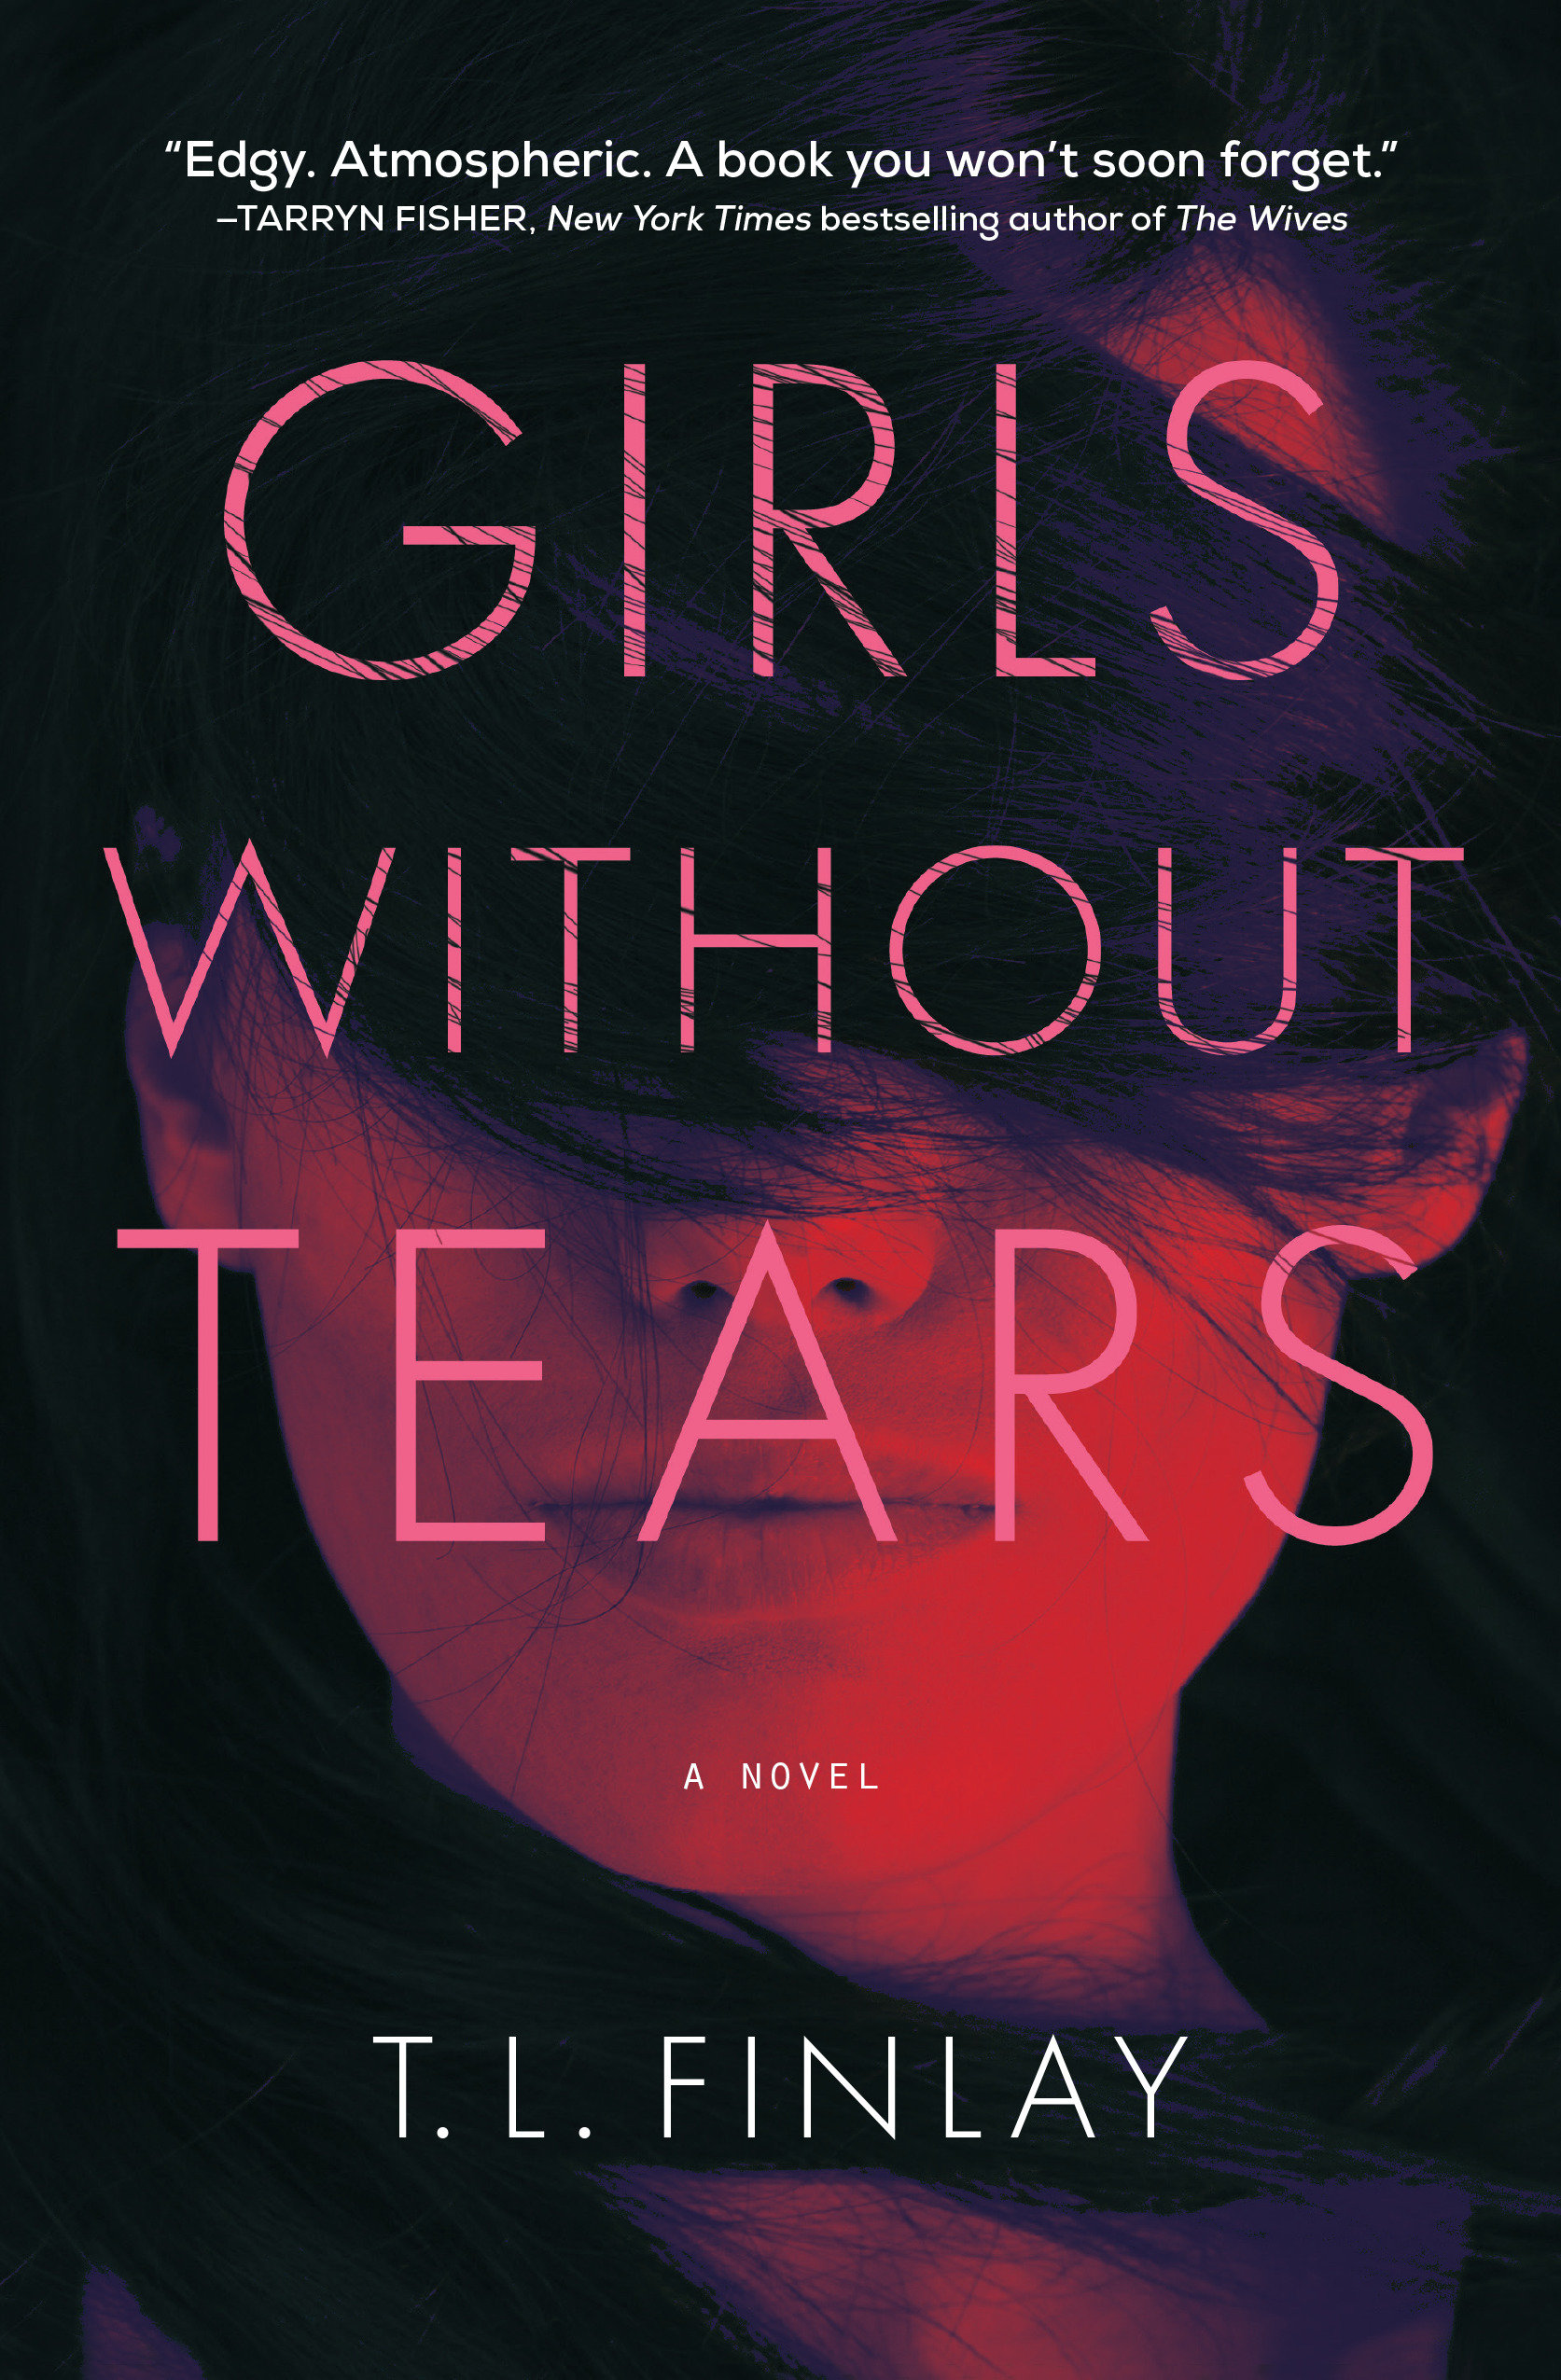 Girls Without Tears (Hardcover Book)